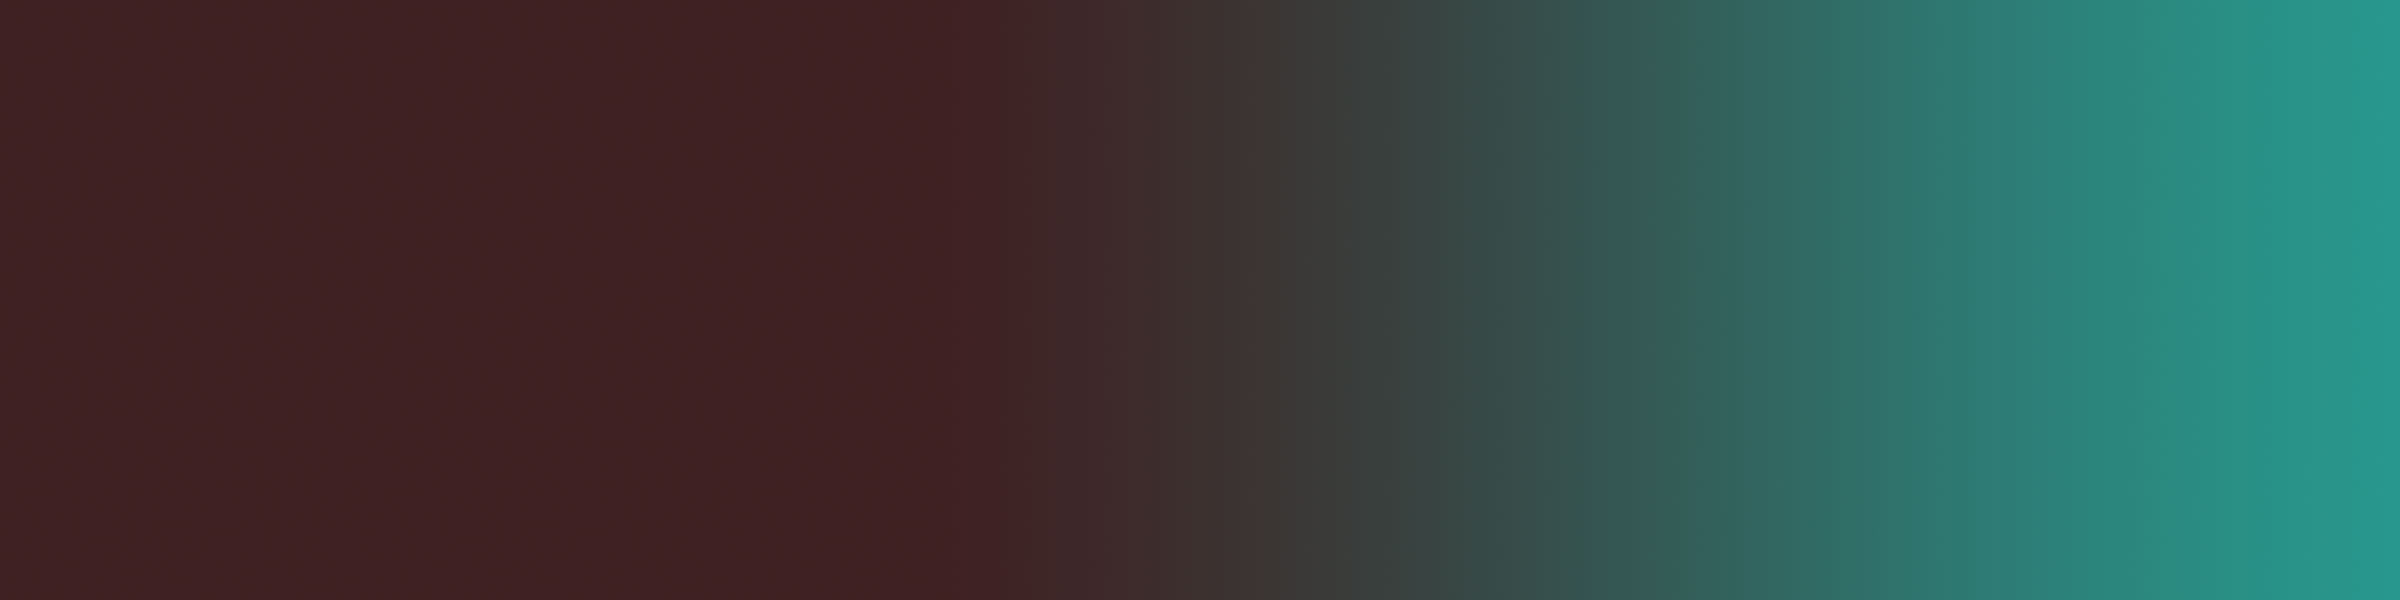 gradient-page-banner